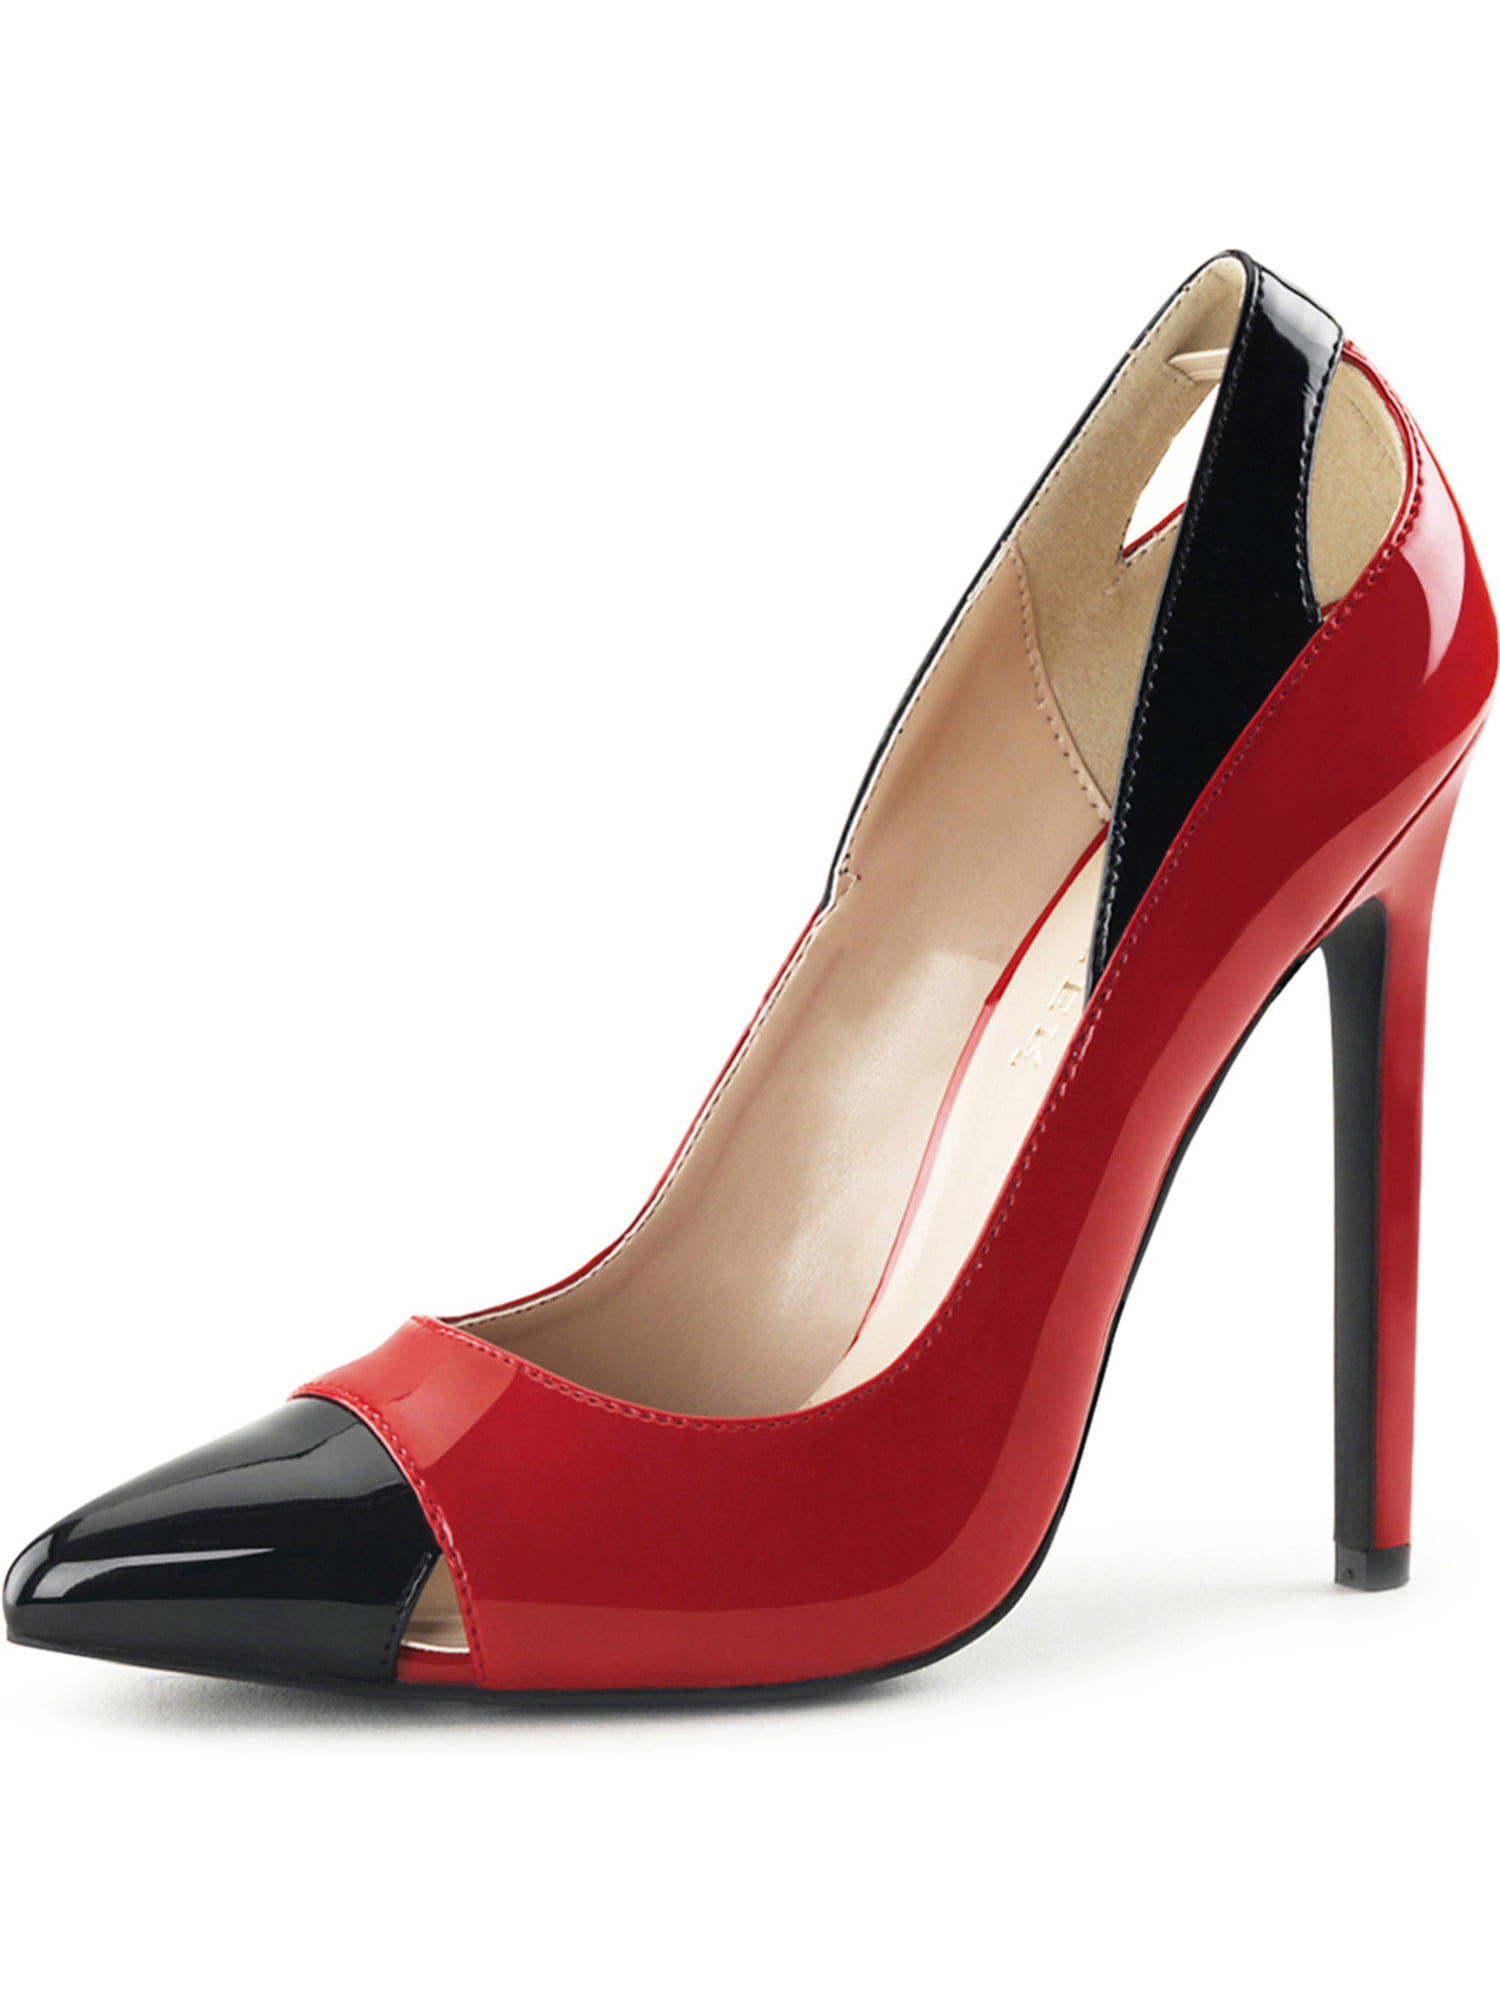 red and black shoes womens